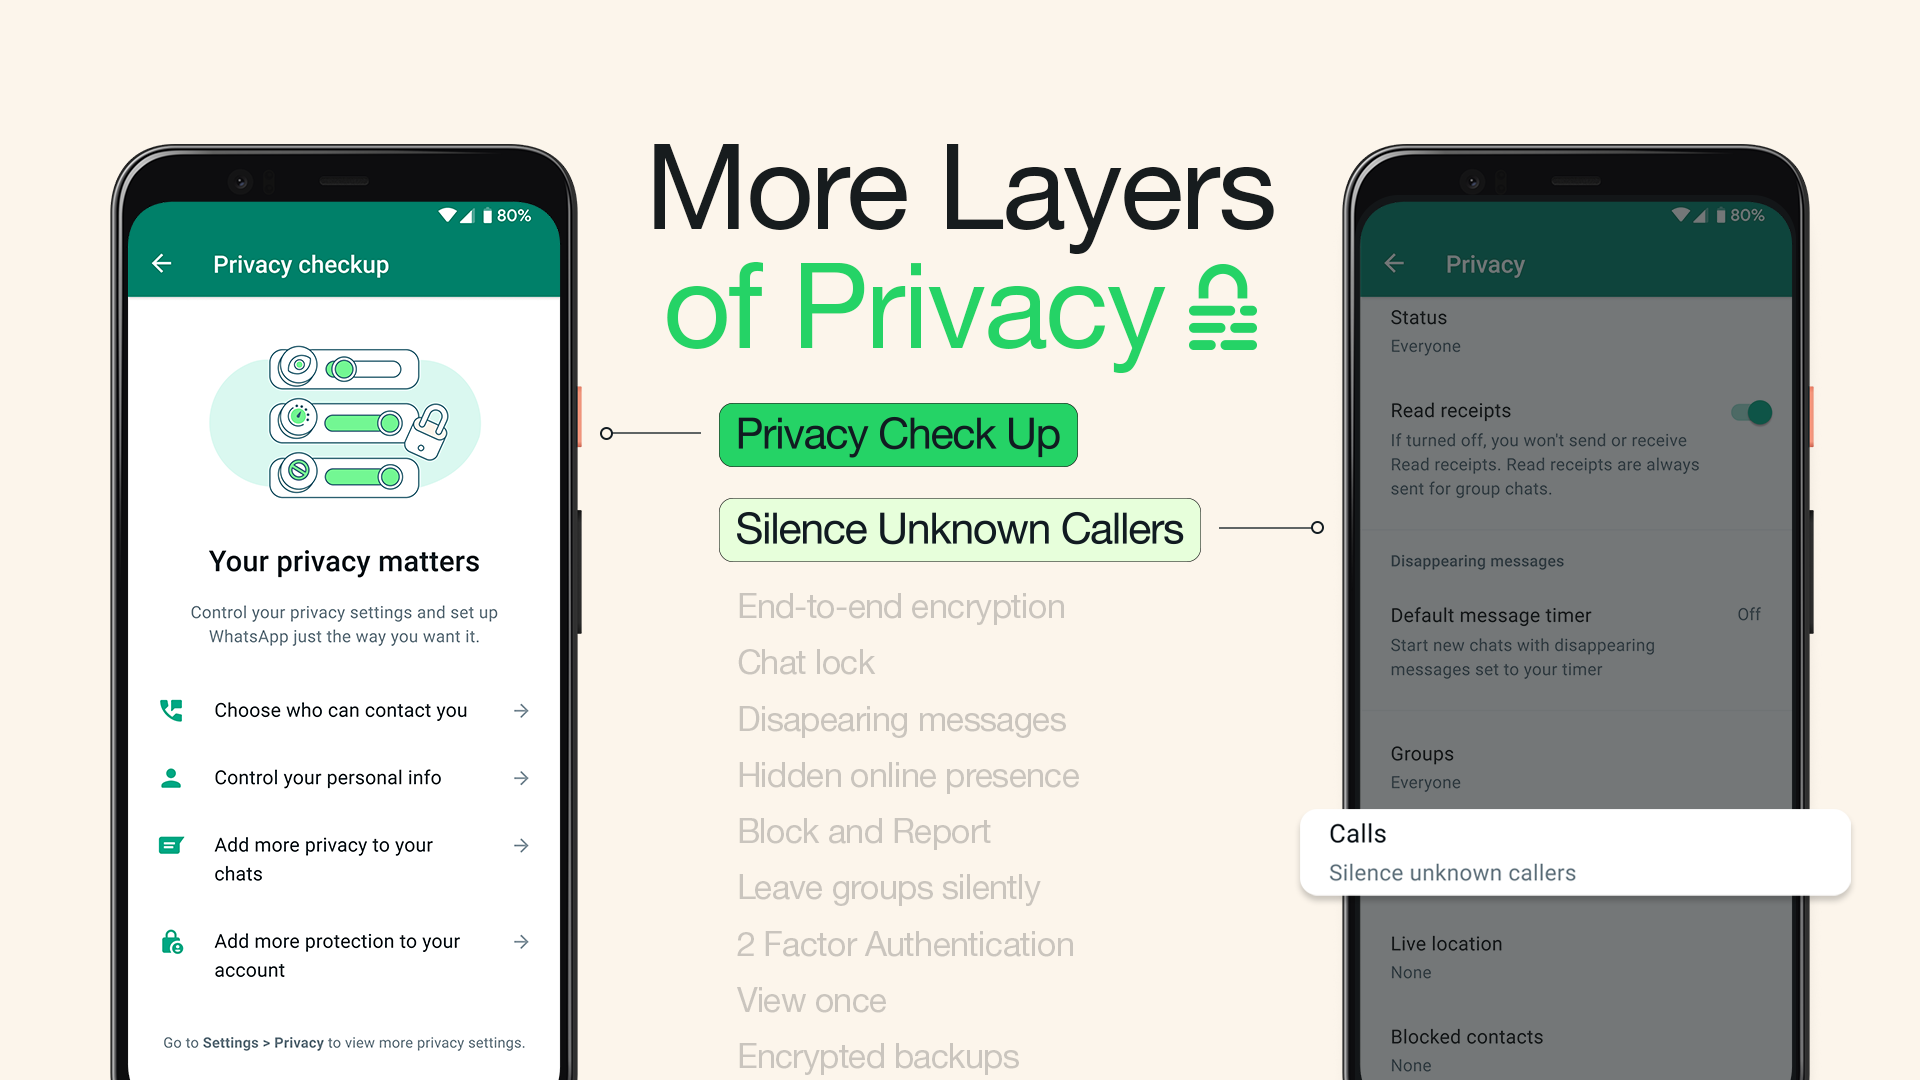 WhatsApp wants you to silence unknown callers